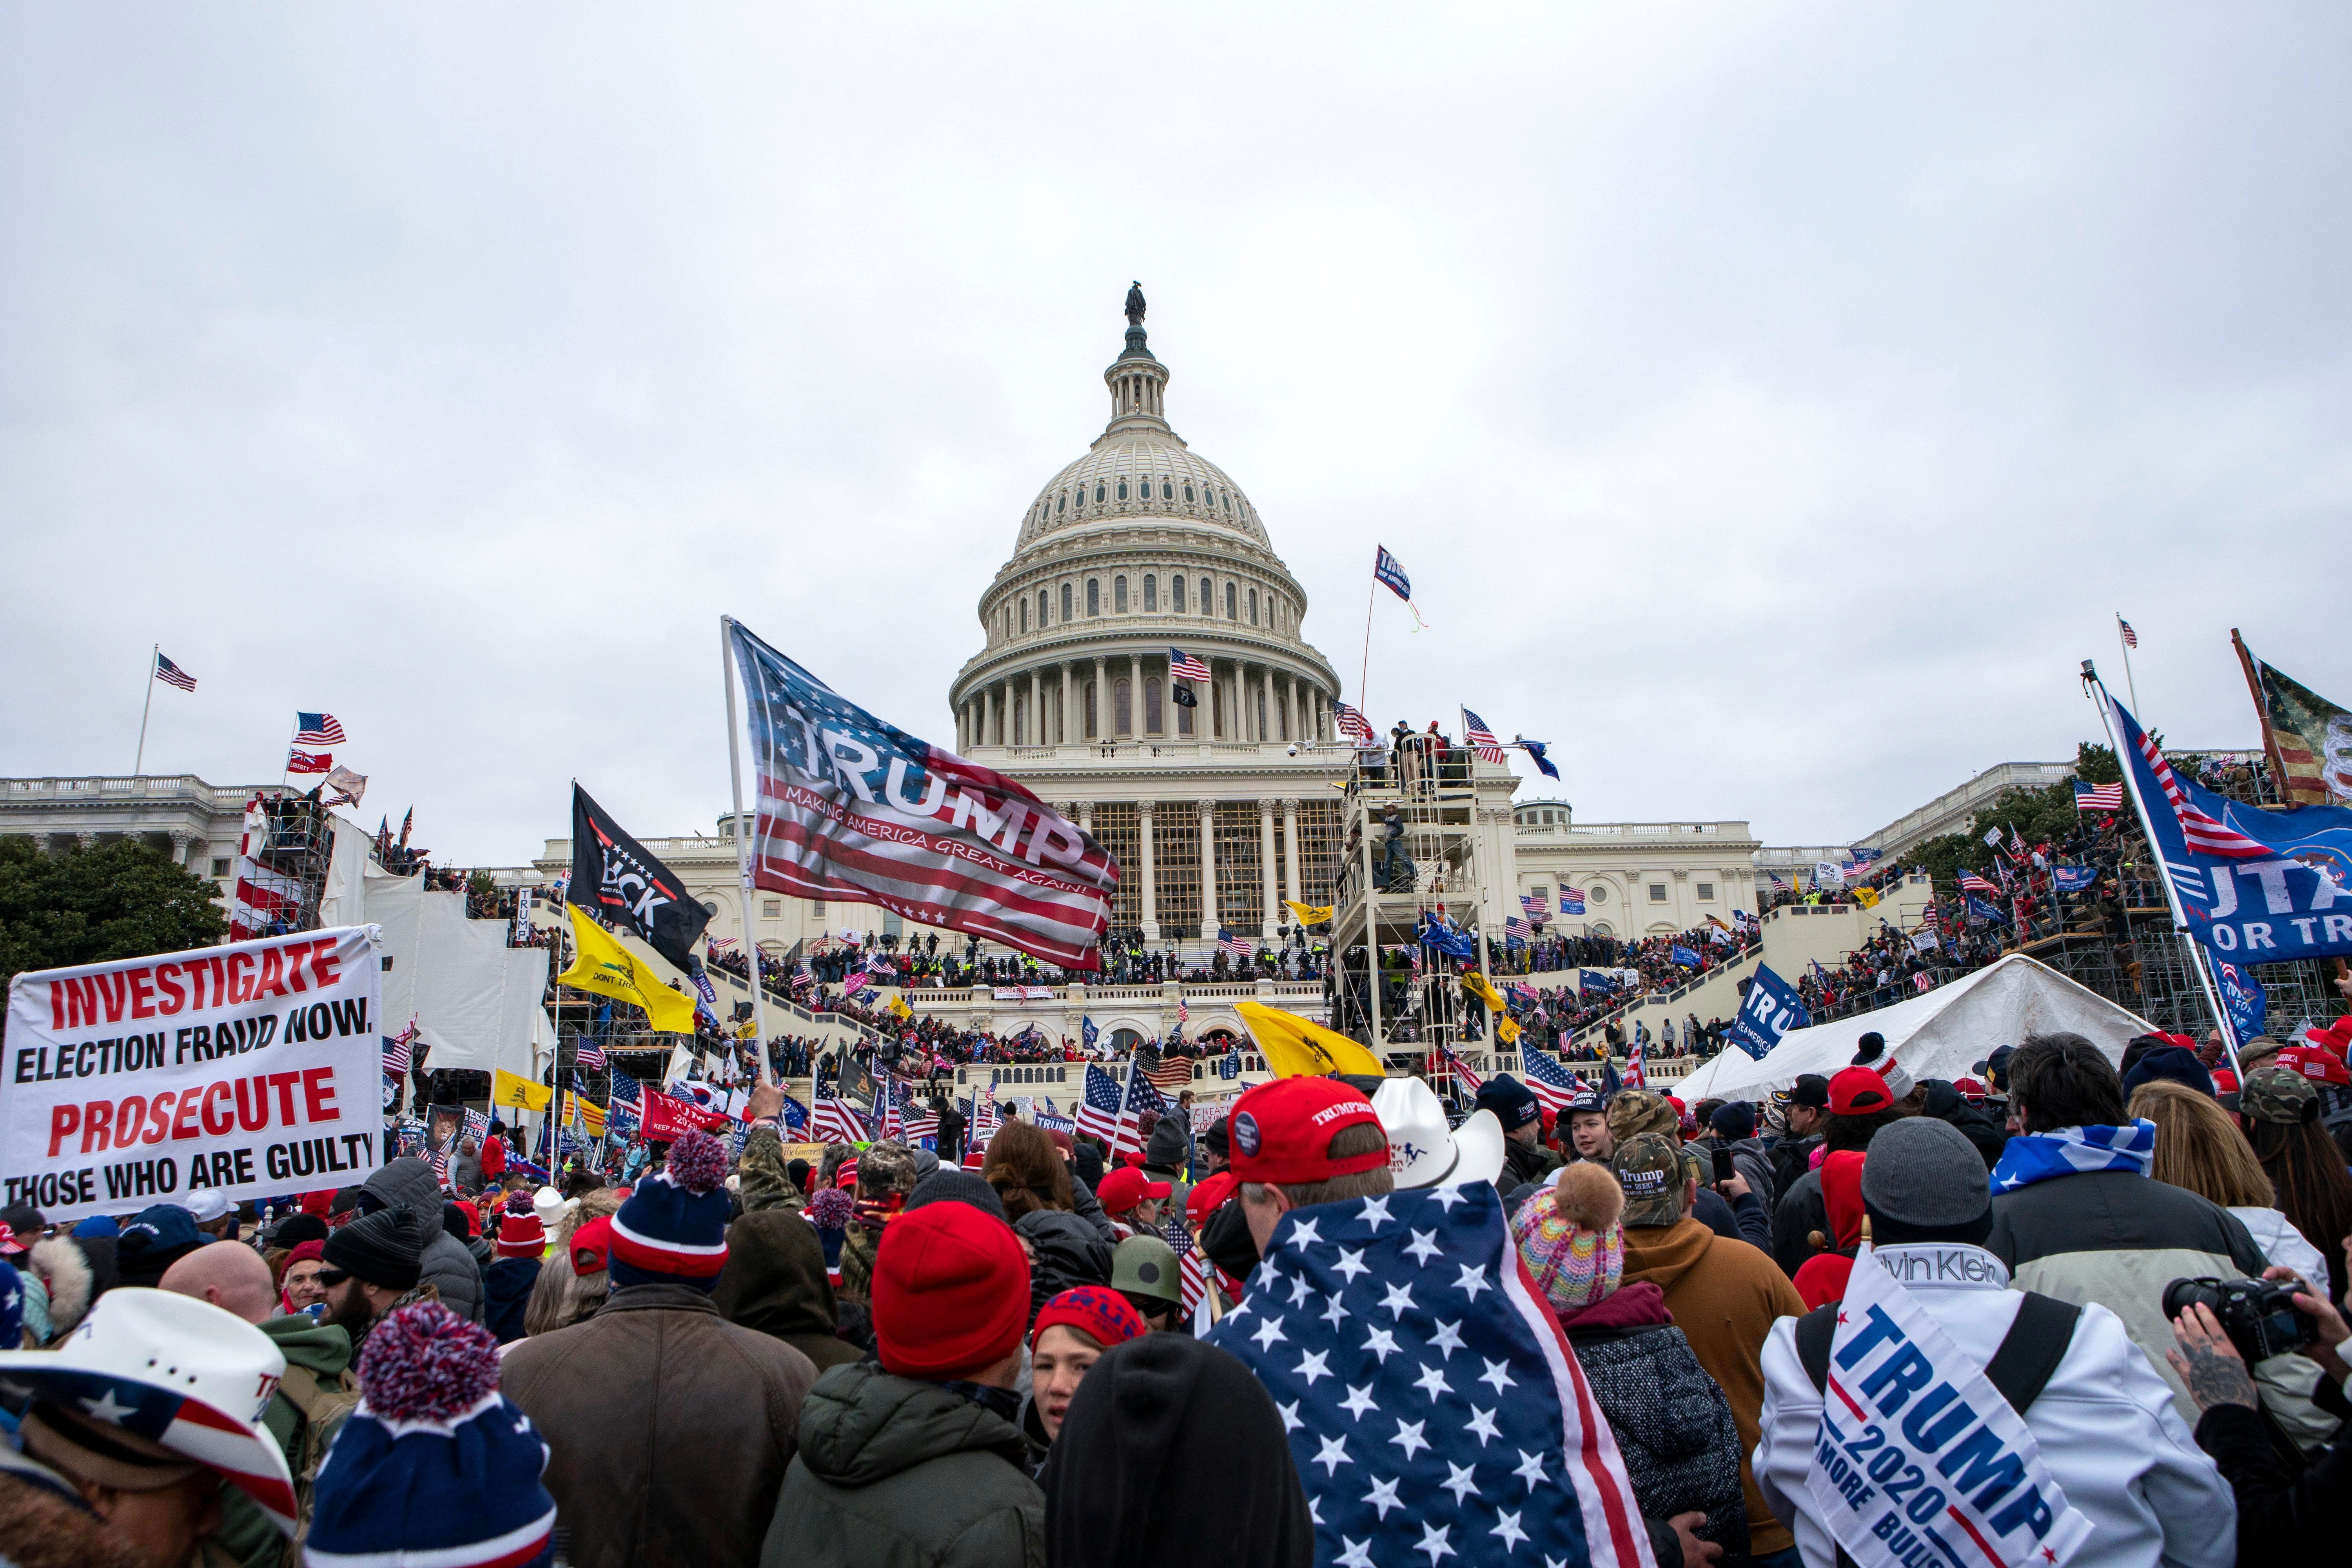 Protesters loyal to President Donald Trump rally at the U.S. Capitol in Washington on Jan. 6, 2021